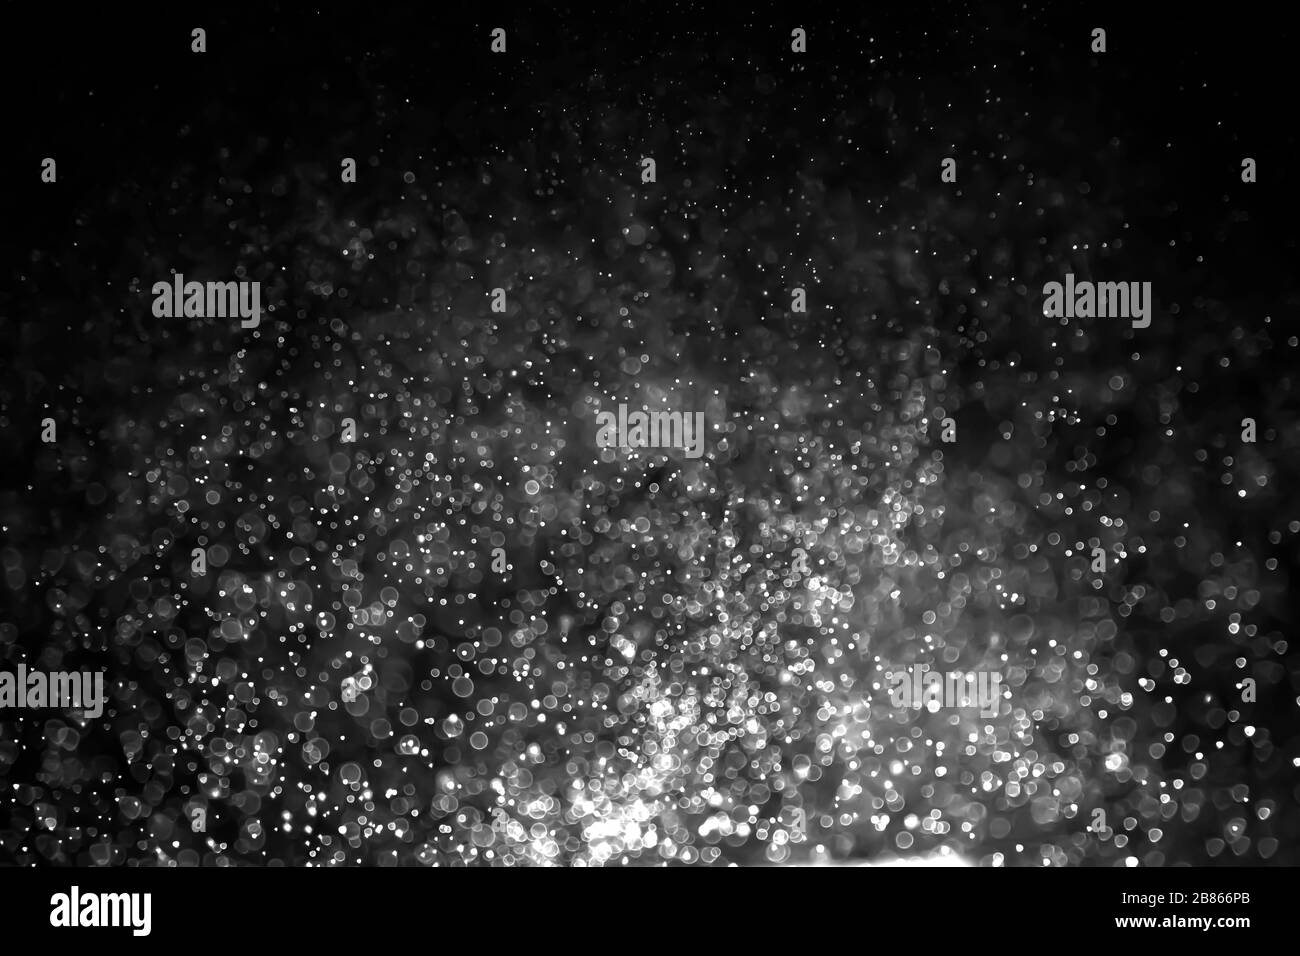 Texture background abstract black and white or silver Glitter and elegant for Christmas. Dust white. Sparkling magical dust particles. Magic concept. Stock Photo